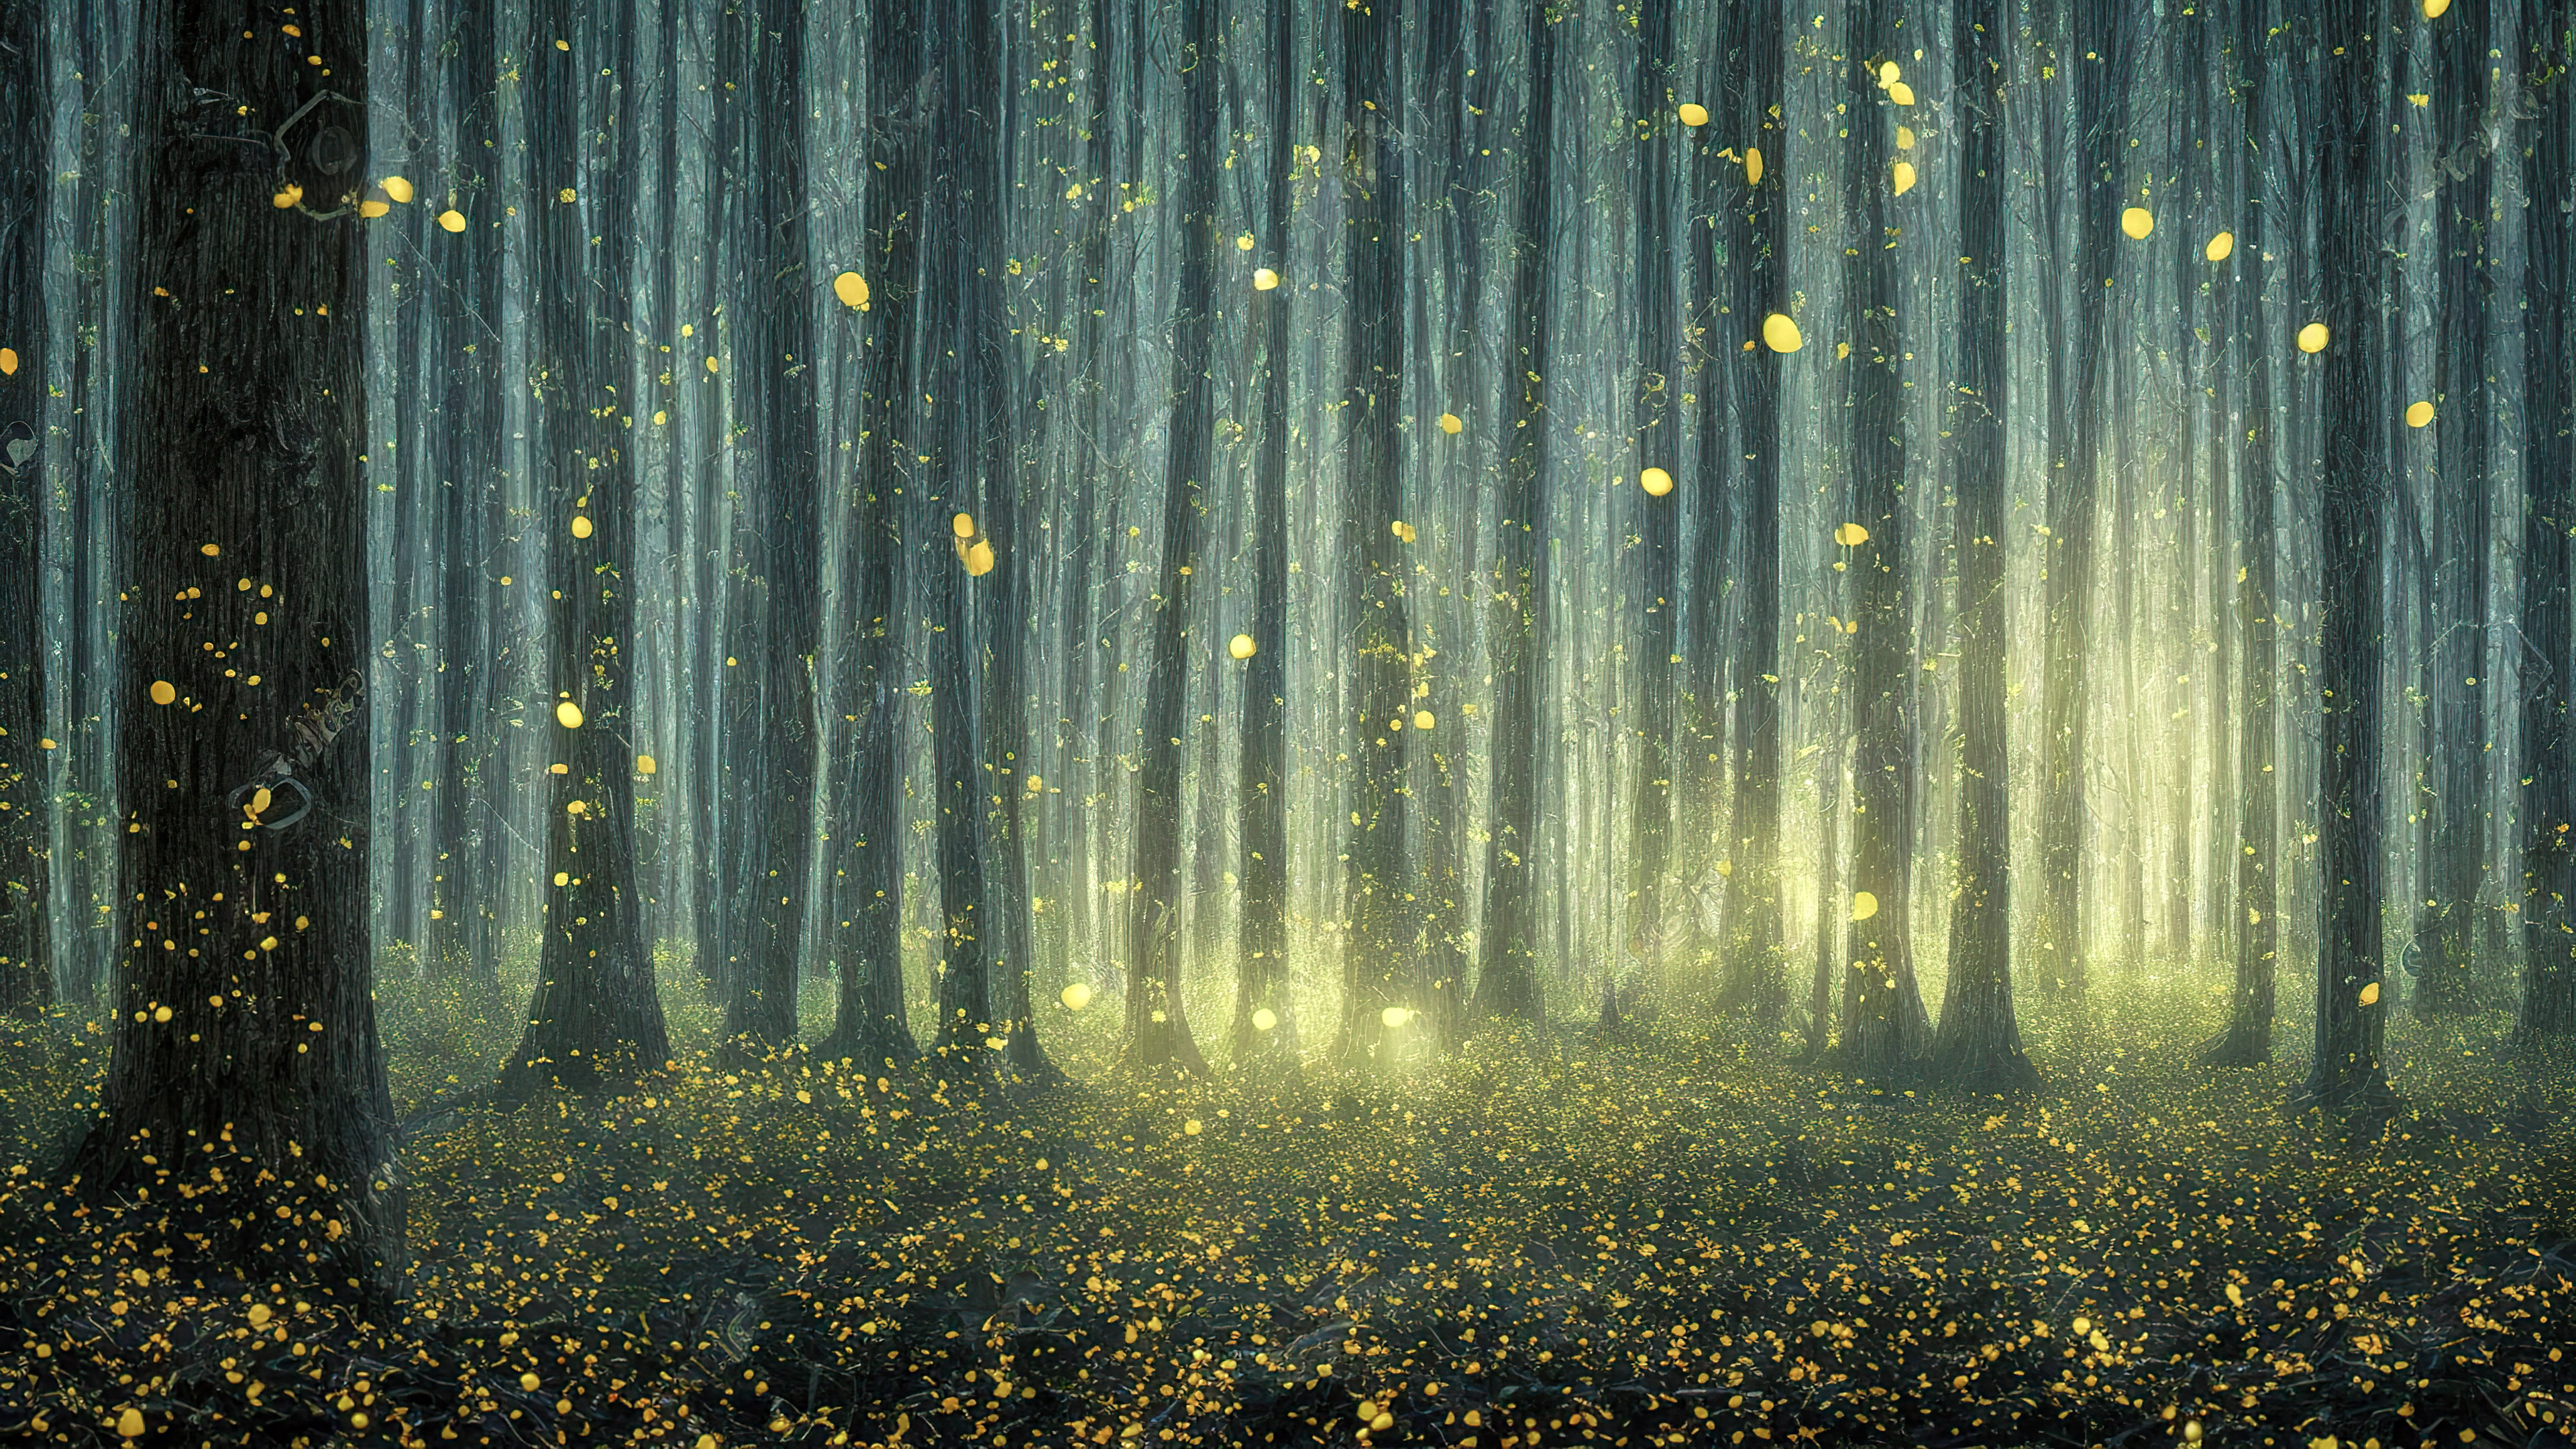 Discover the charm of our beautiful nature pictures wallpaper, showcasing a magical forest illuminated by the soft glow of fireflies on a warm summer evening.